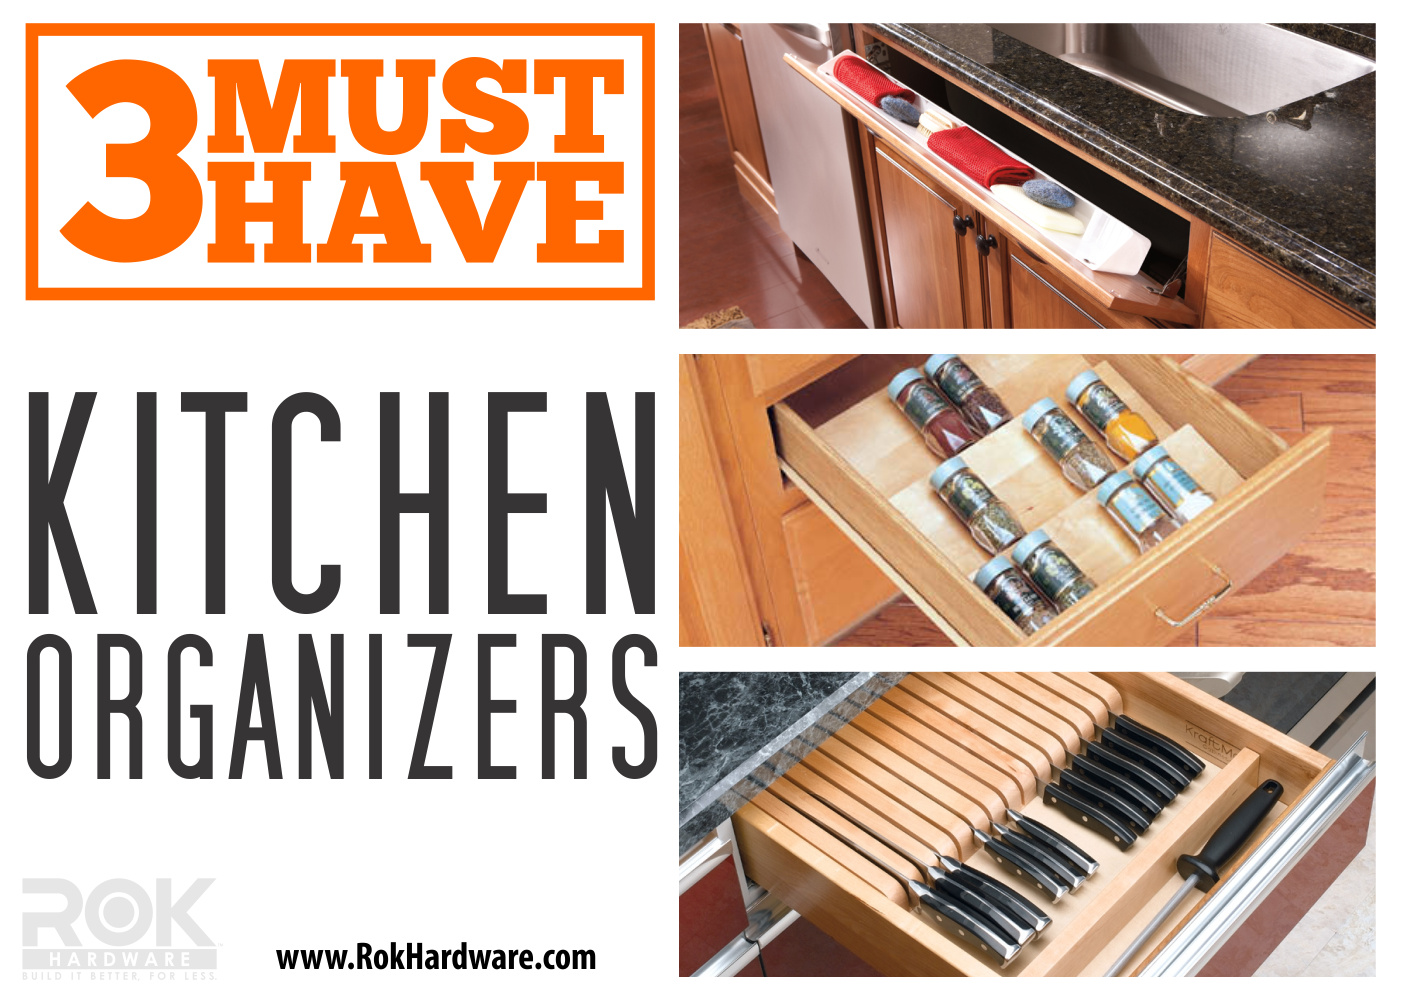 3 Rev-A-Shelf Products to Keep your Kitchen Organized